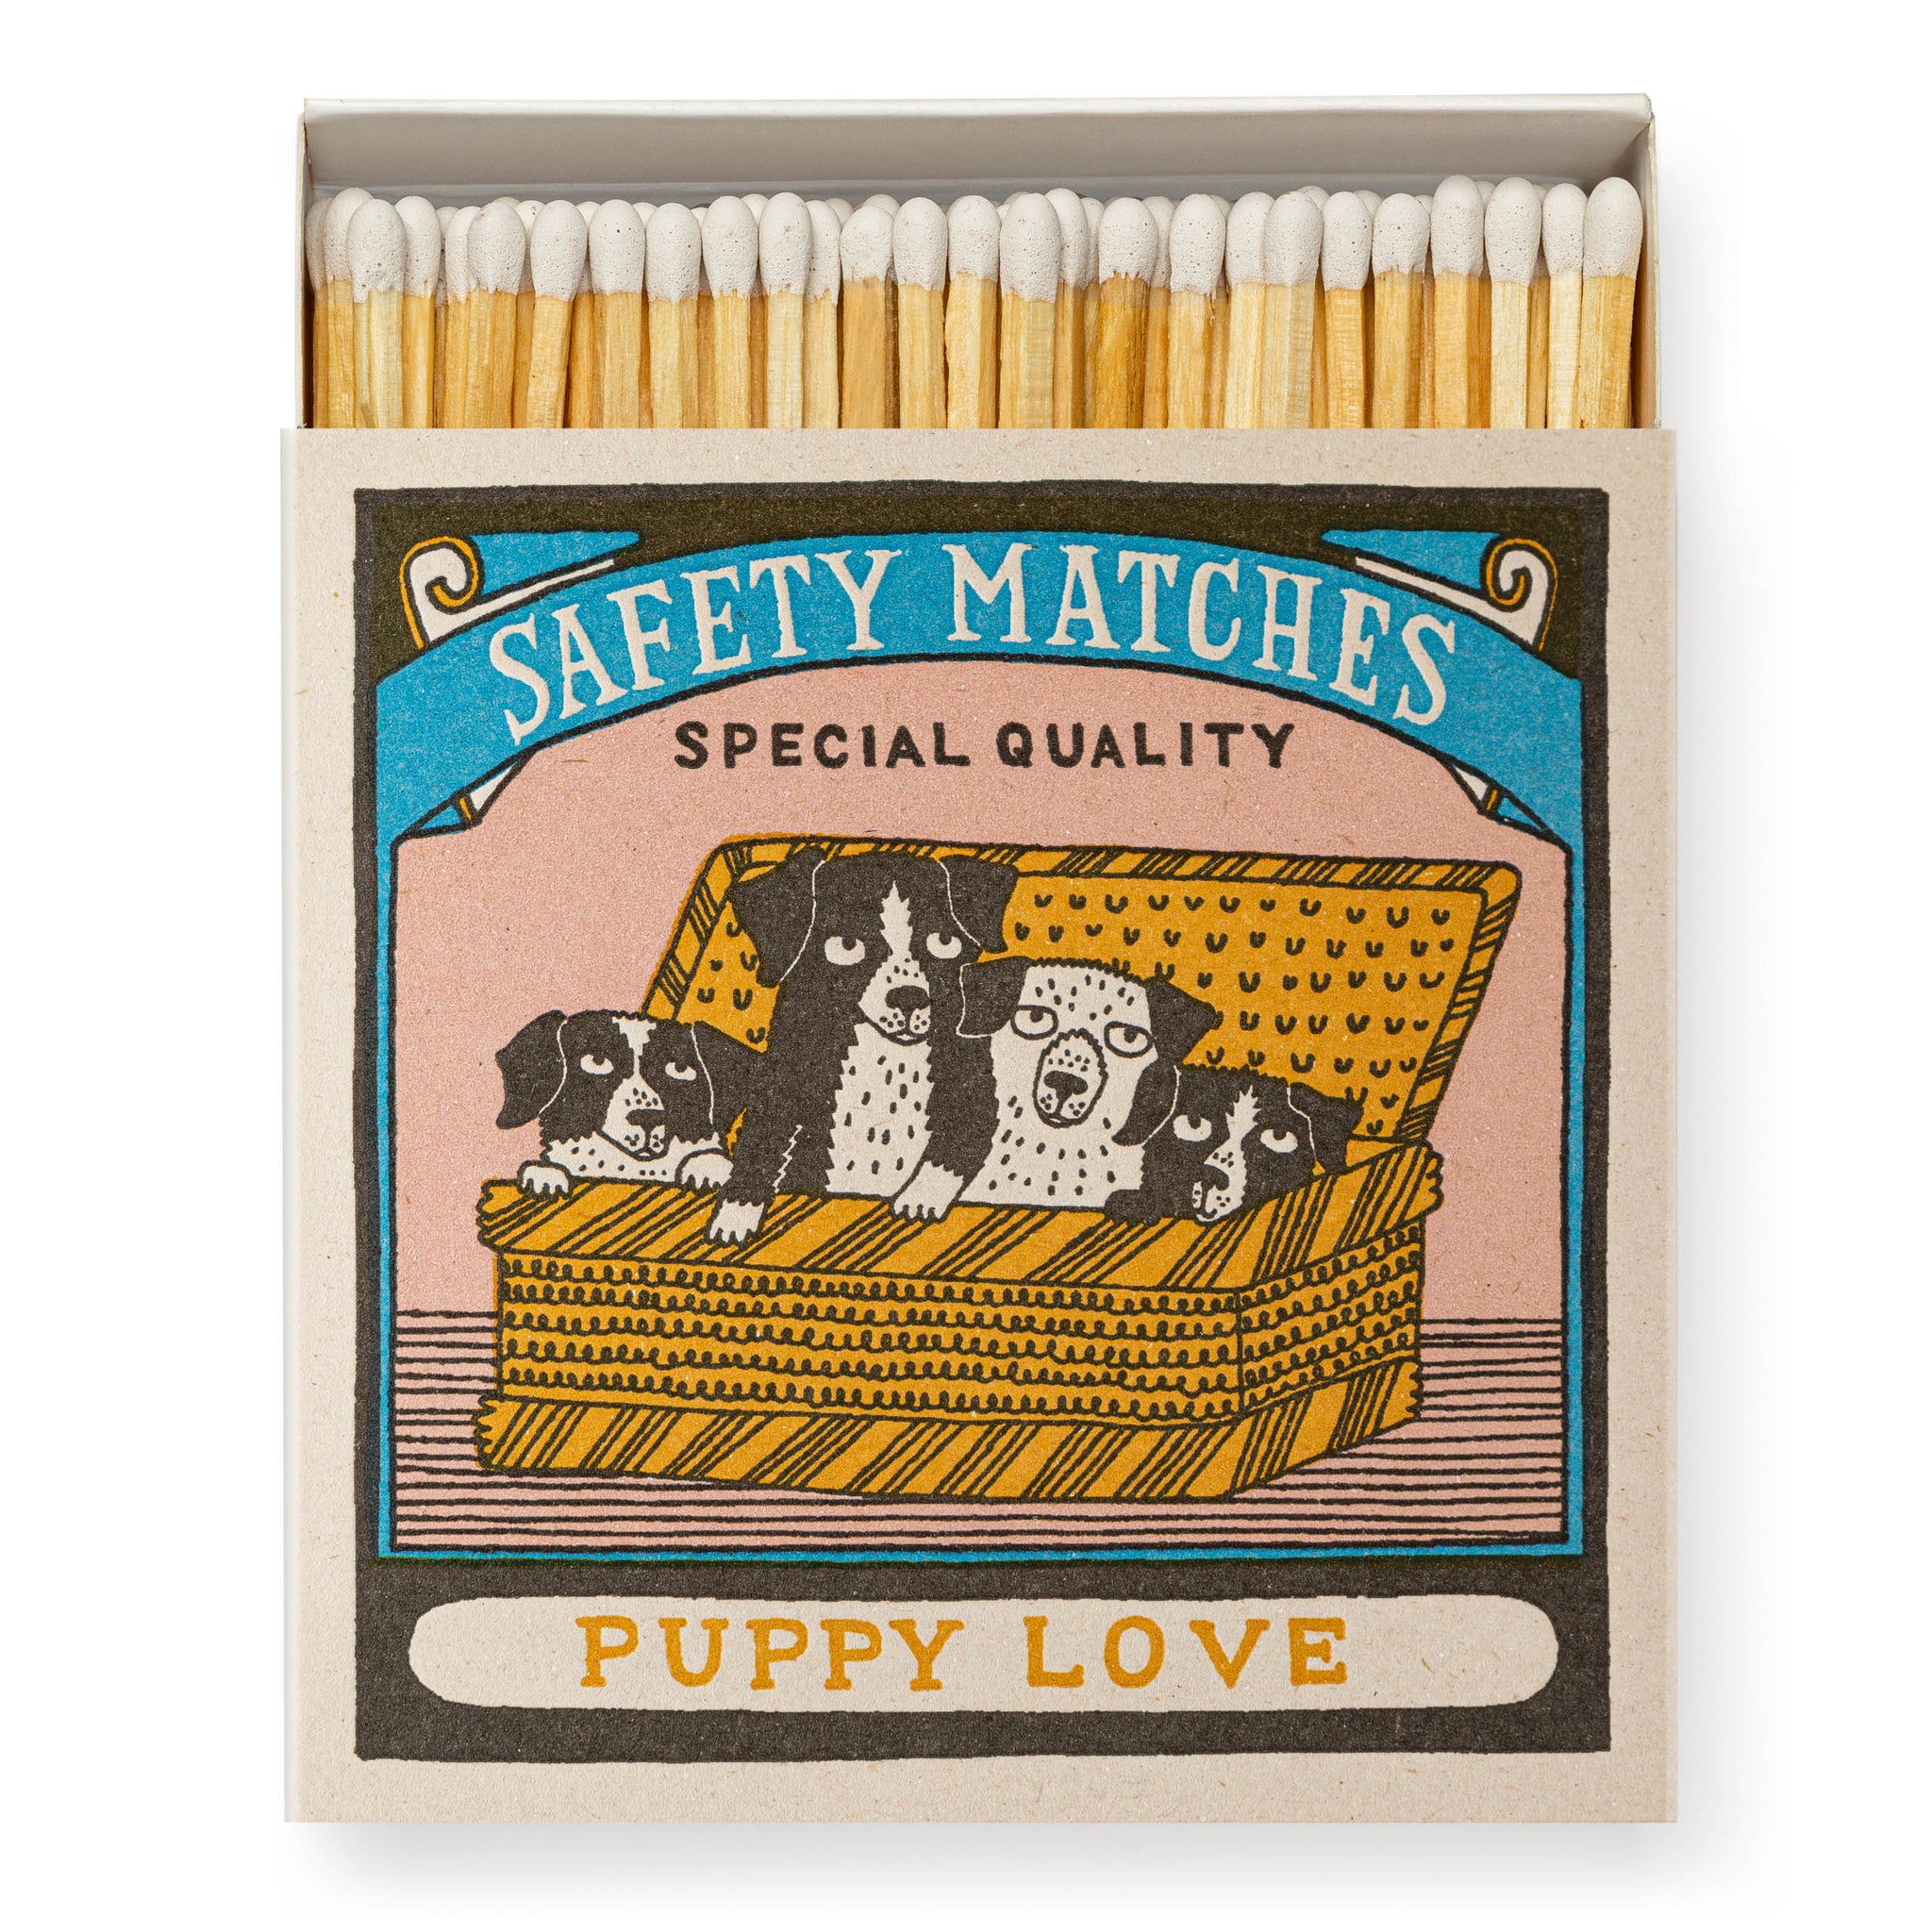 Puppy Love Square Matches